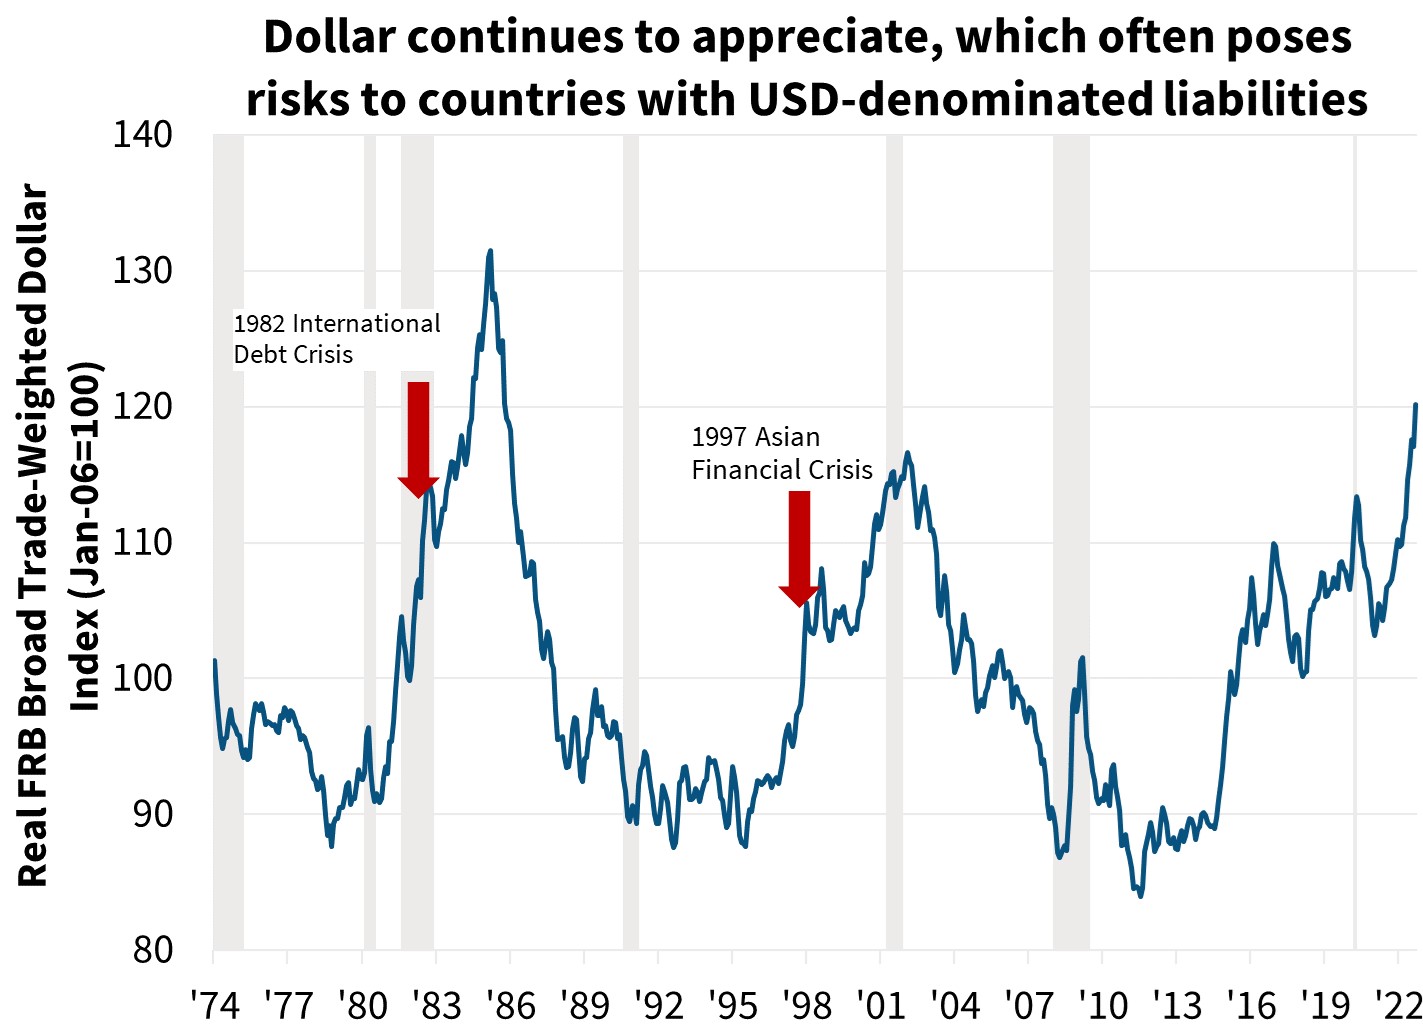  Dollar continues to appreciate, which often poses risks to countries with USD-denominated liabilities 